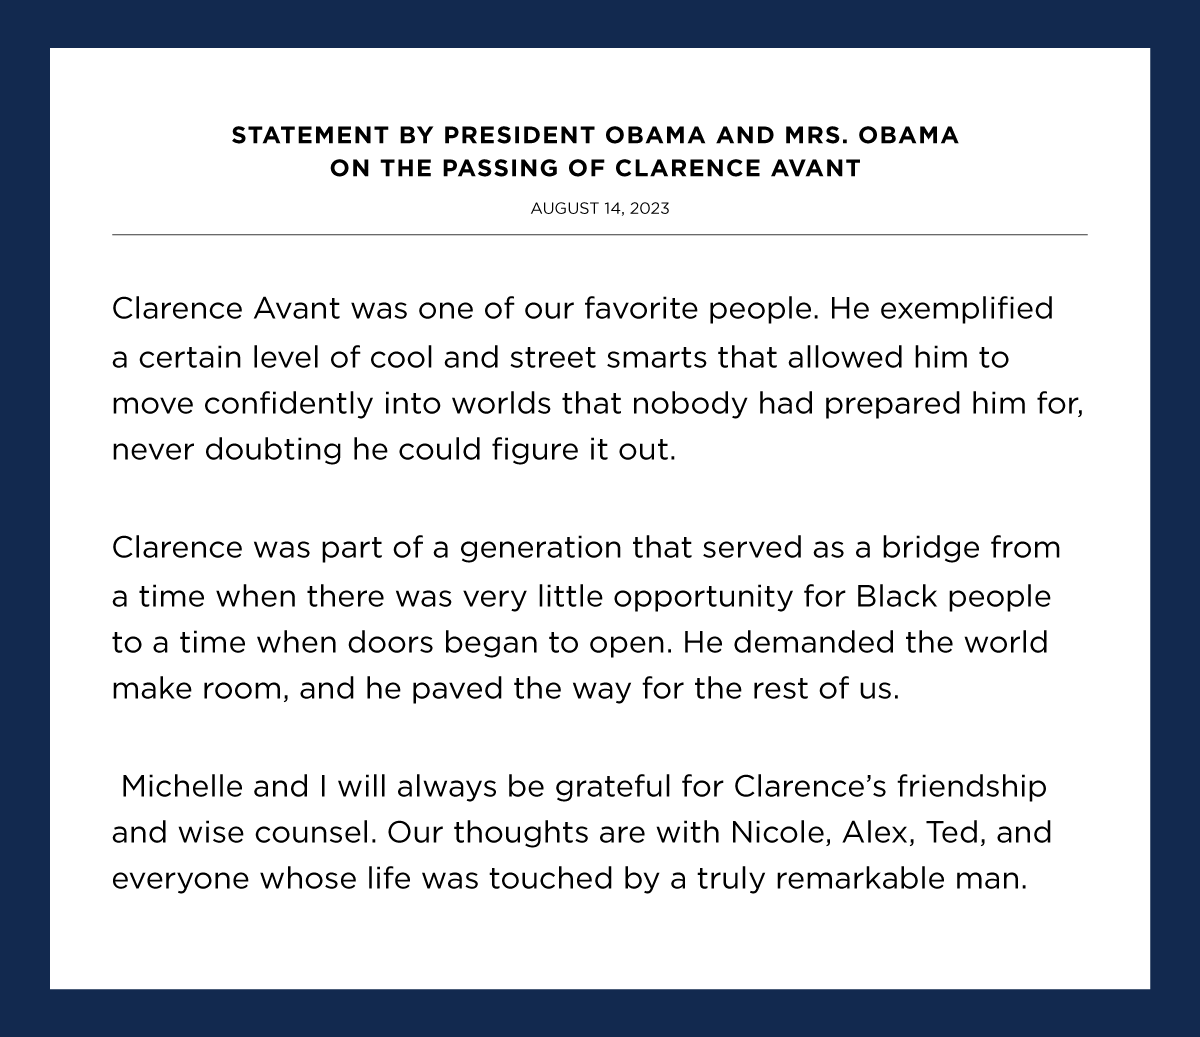 Michelle and I will always be grateful for Clarence’s friendship and wise counsel. Our thoughts are with his family and everyone whose life was touched by a truly remarkable man.